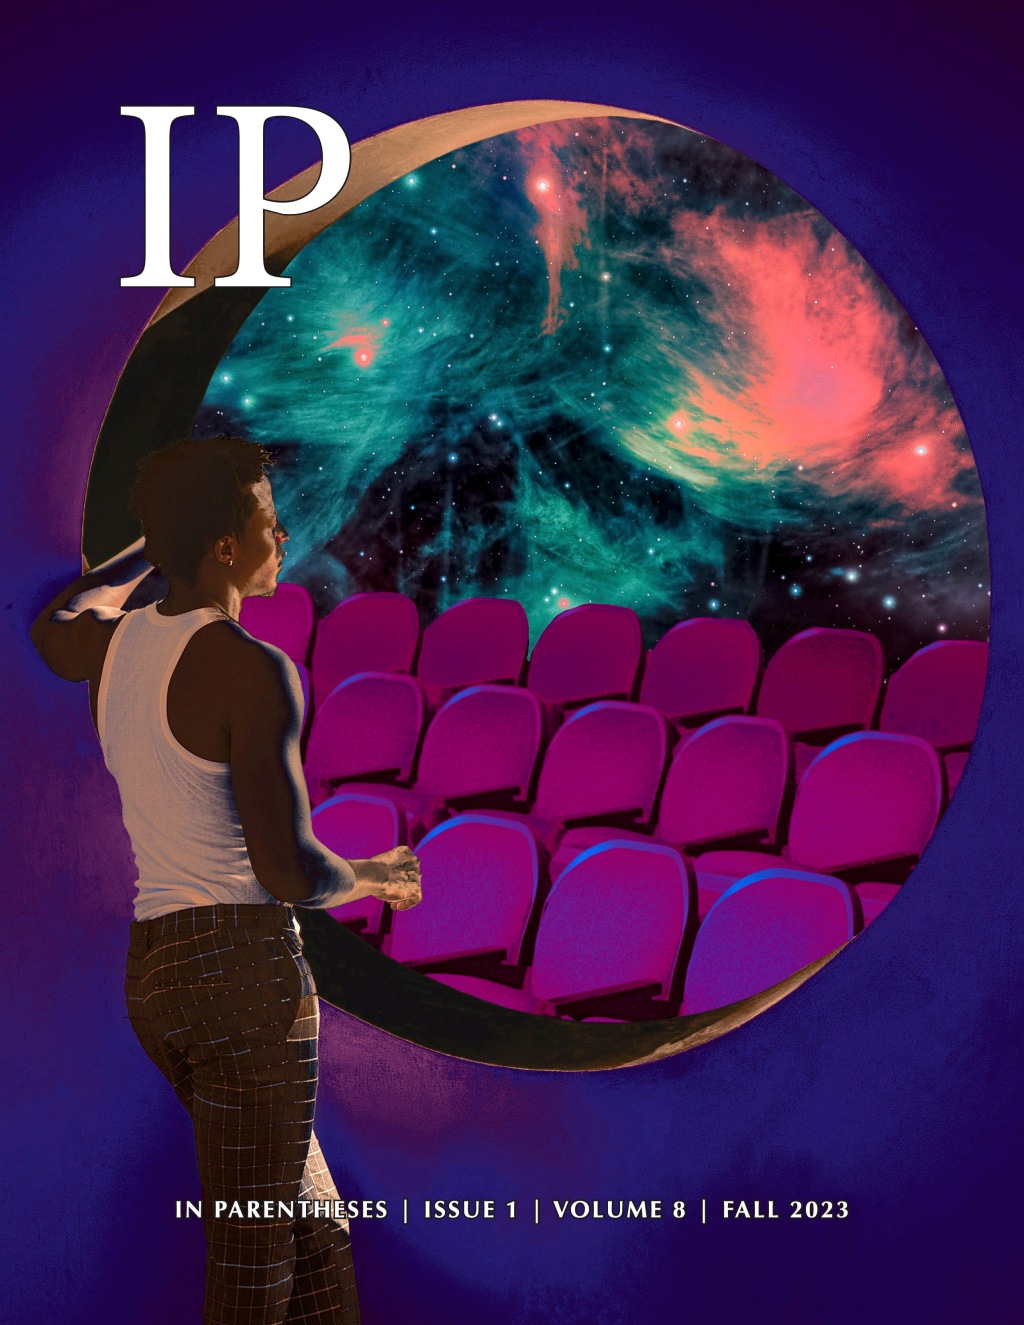 Now Available: In Parentheses Magazine (Volume 8, Issue 1) Fall 2023